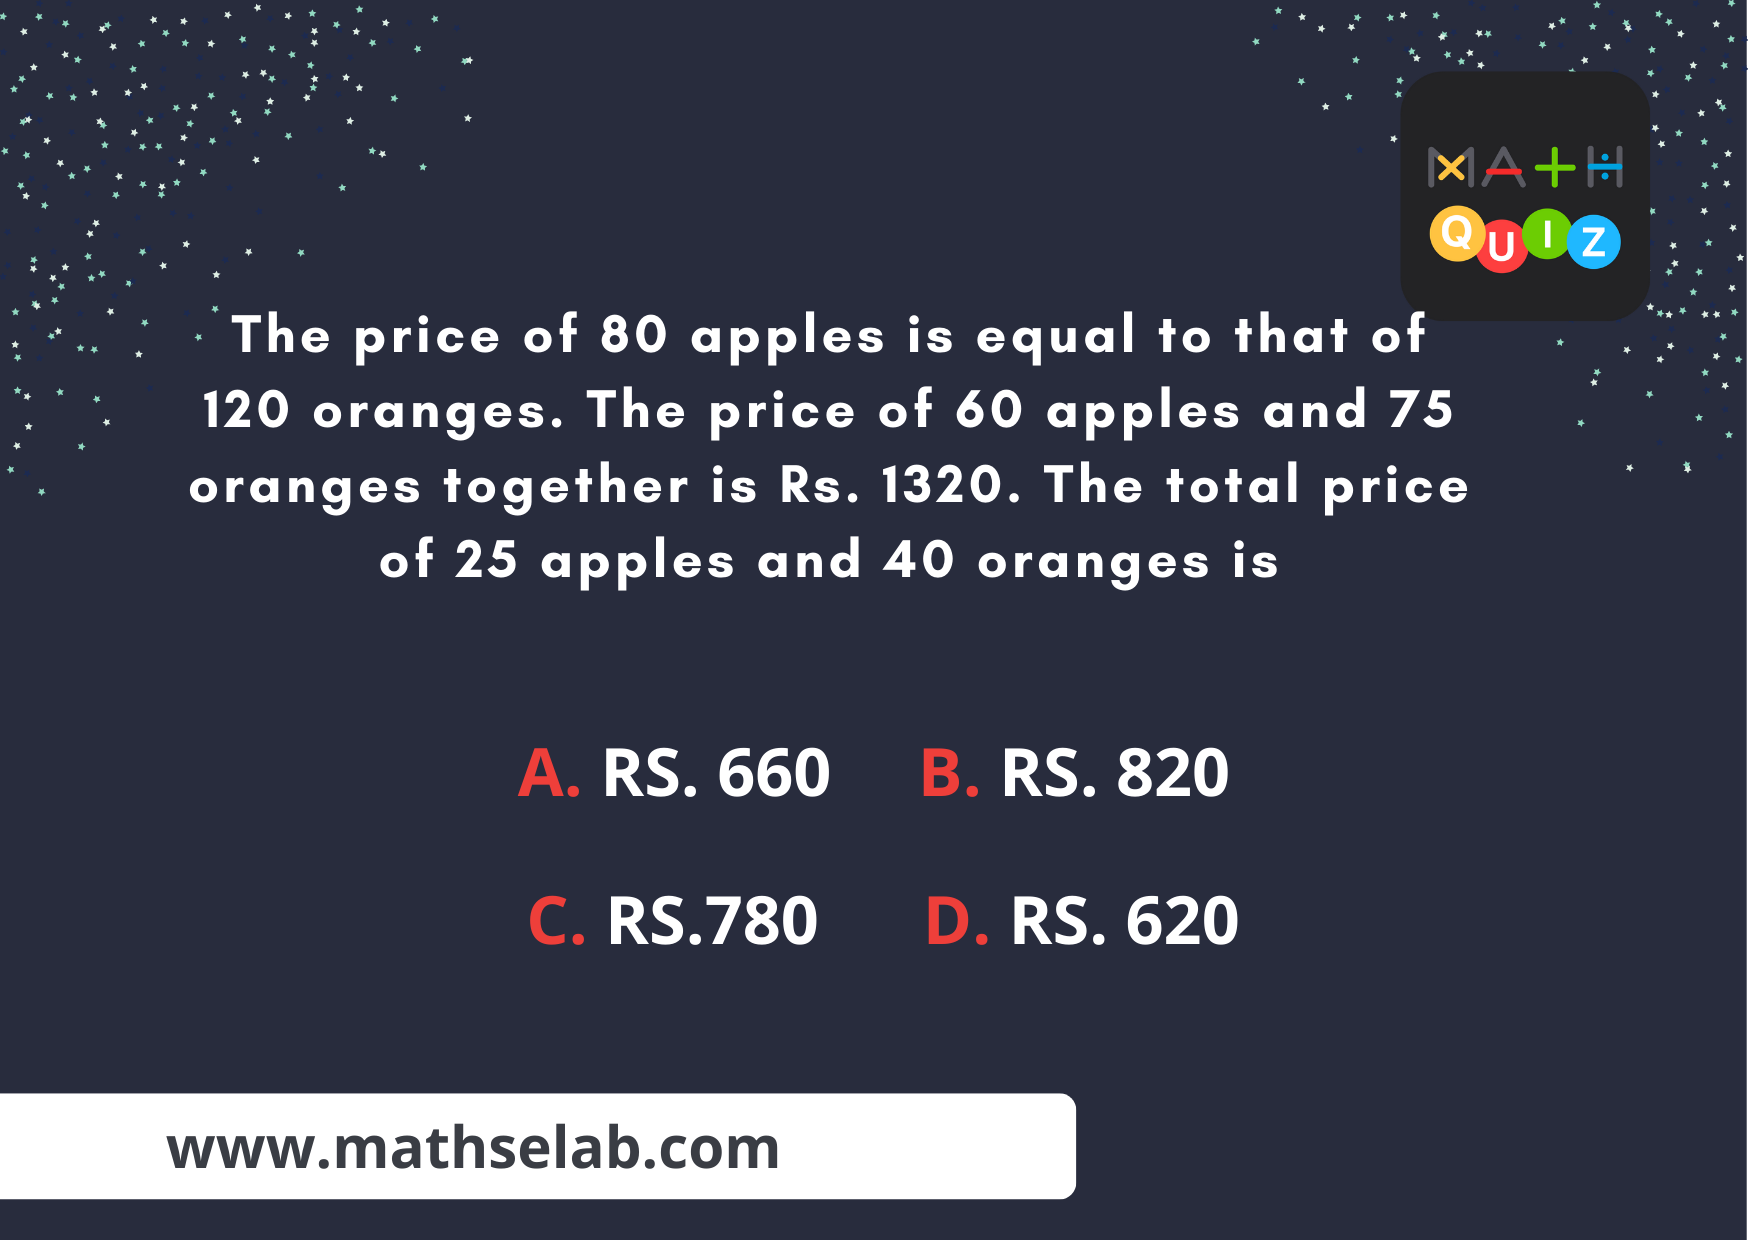 The price of 80 apples is equal to that of 120 oranges. The price of 60 apples and 75 oranges together is Rs. 1320. The total price of 25 apples and 40 oranges is